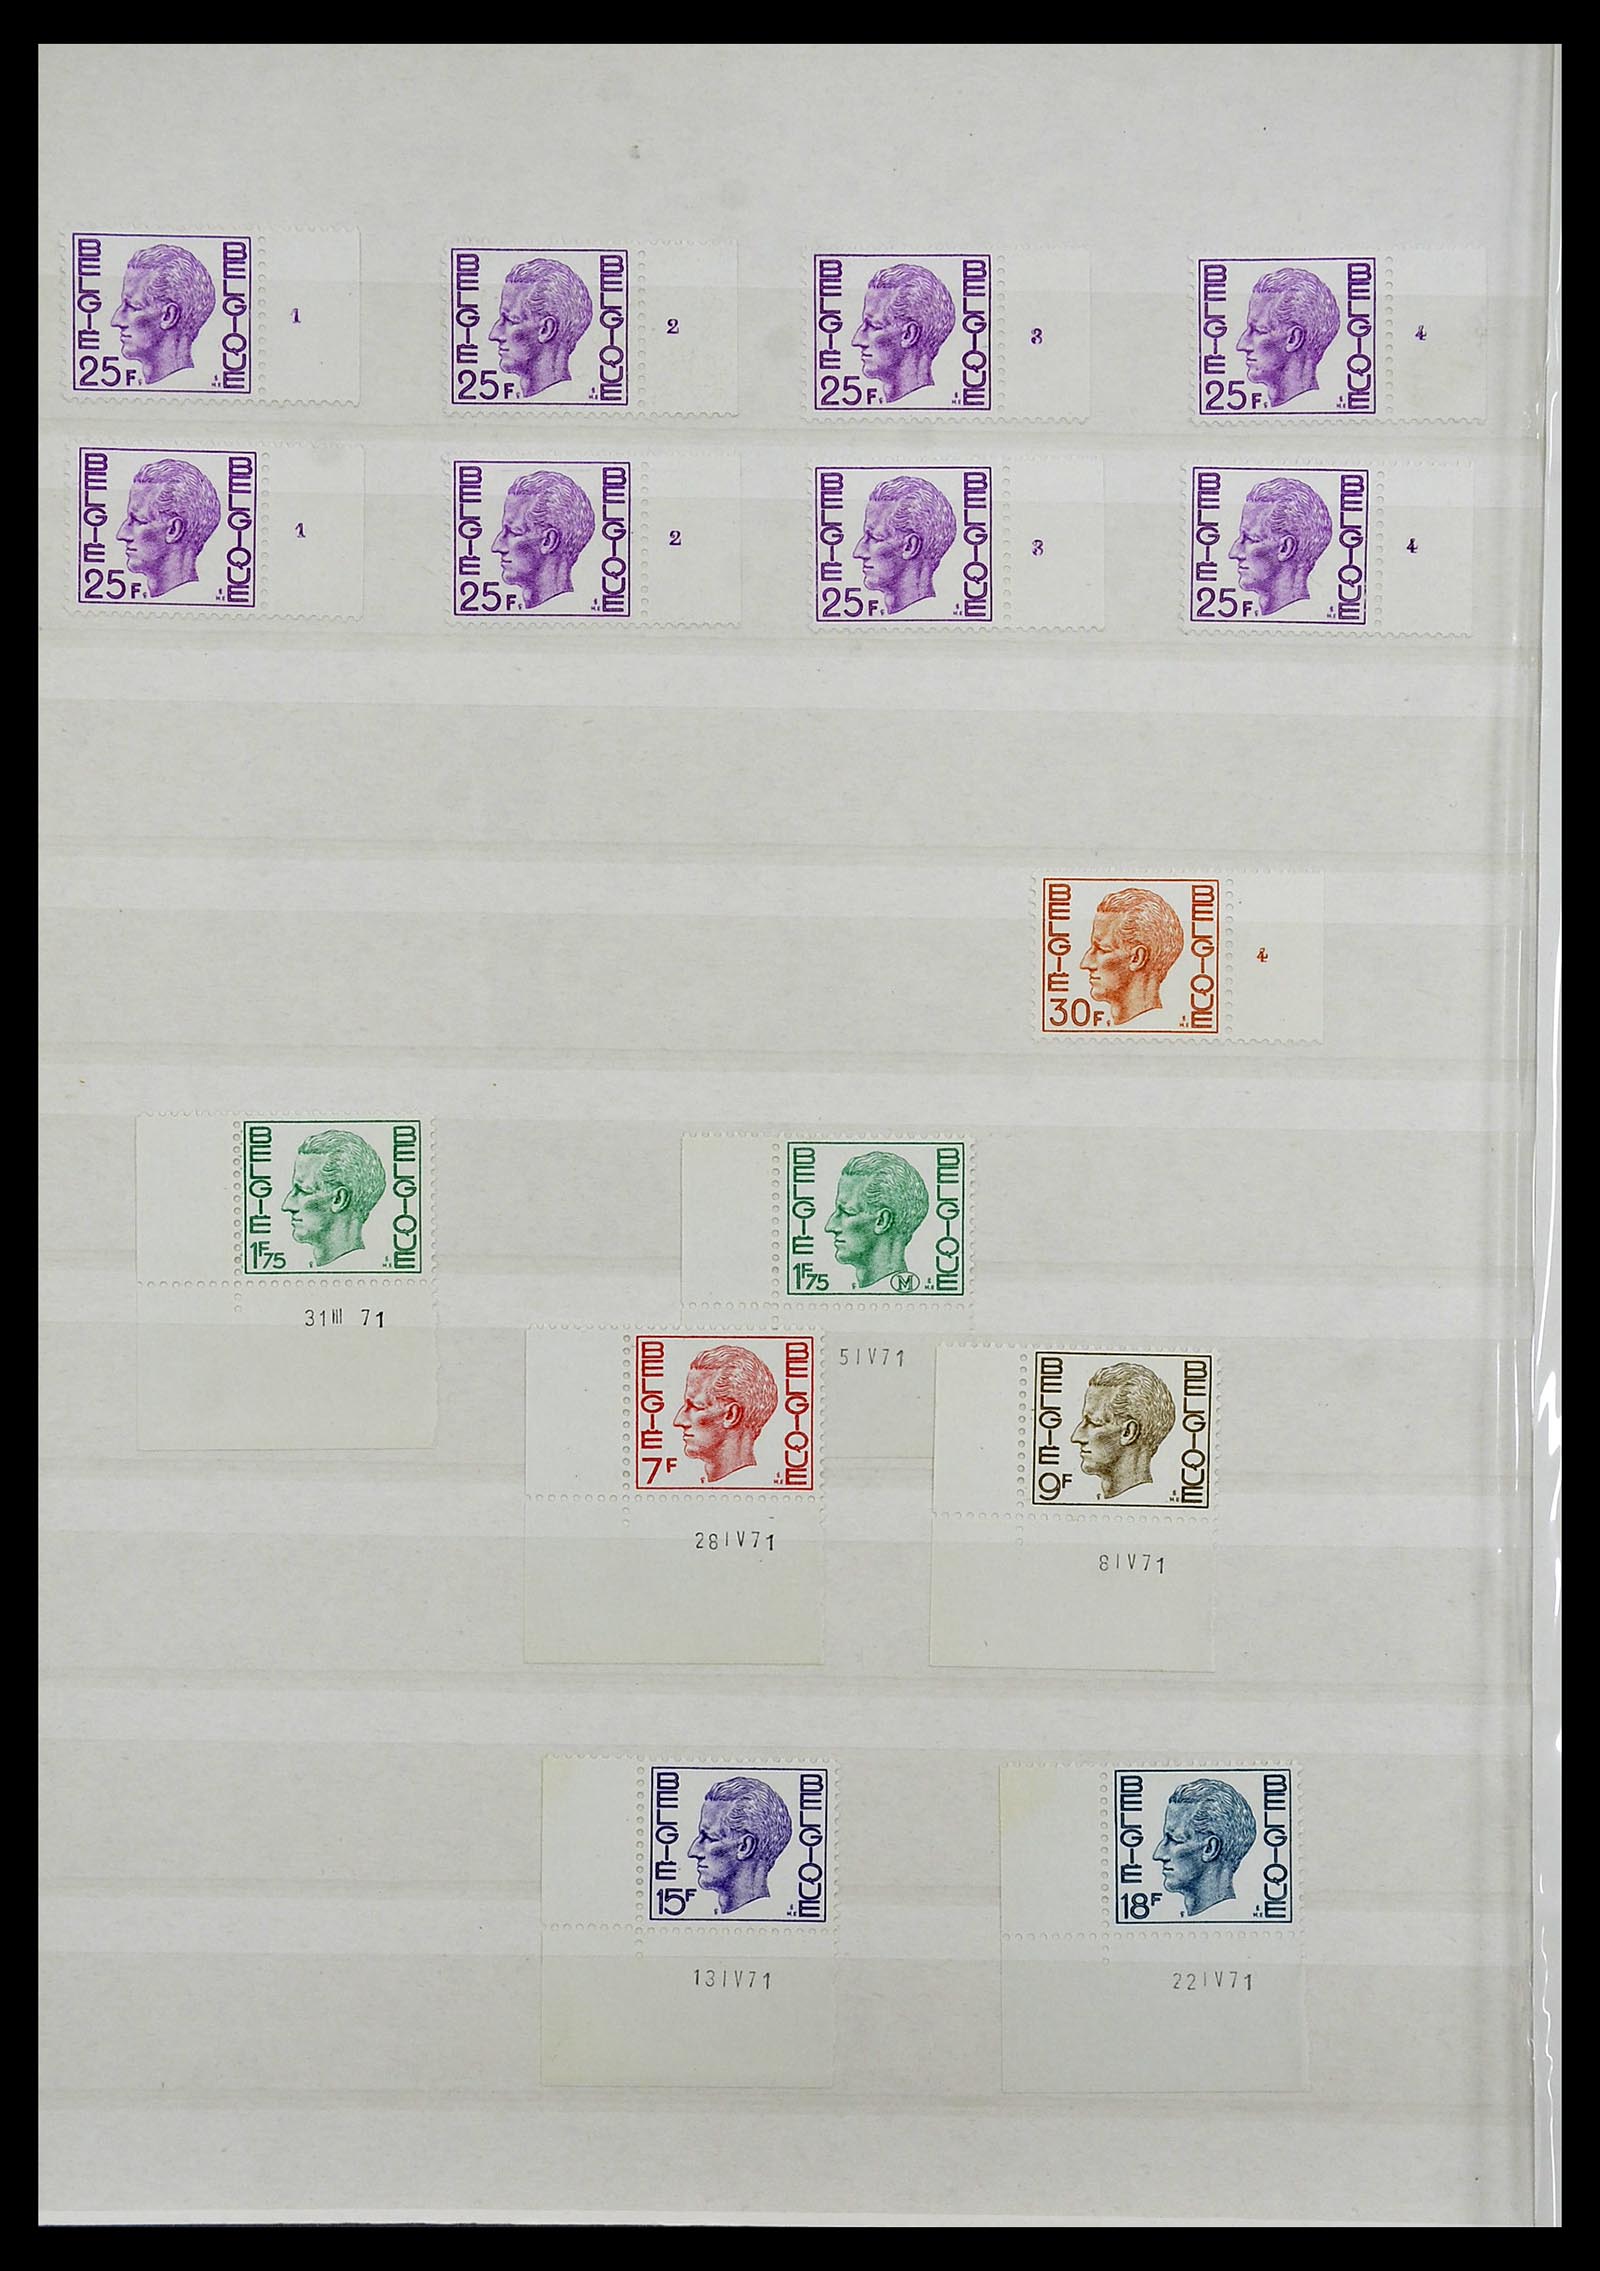 34524 098 - Stamp Collection 34524 Belgium plate and etching numbers 1963-1990.